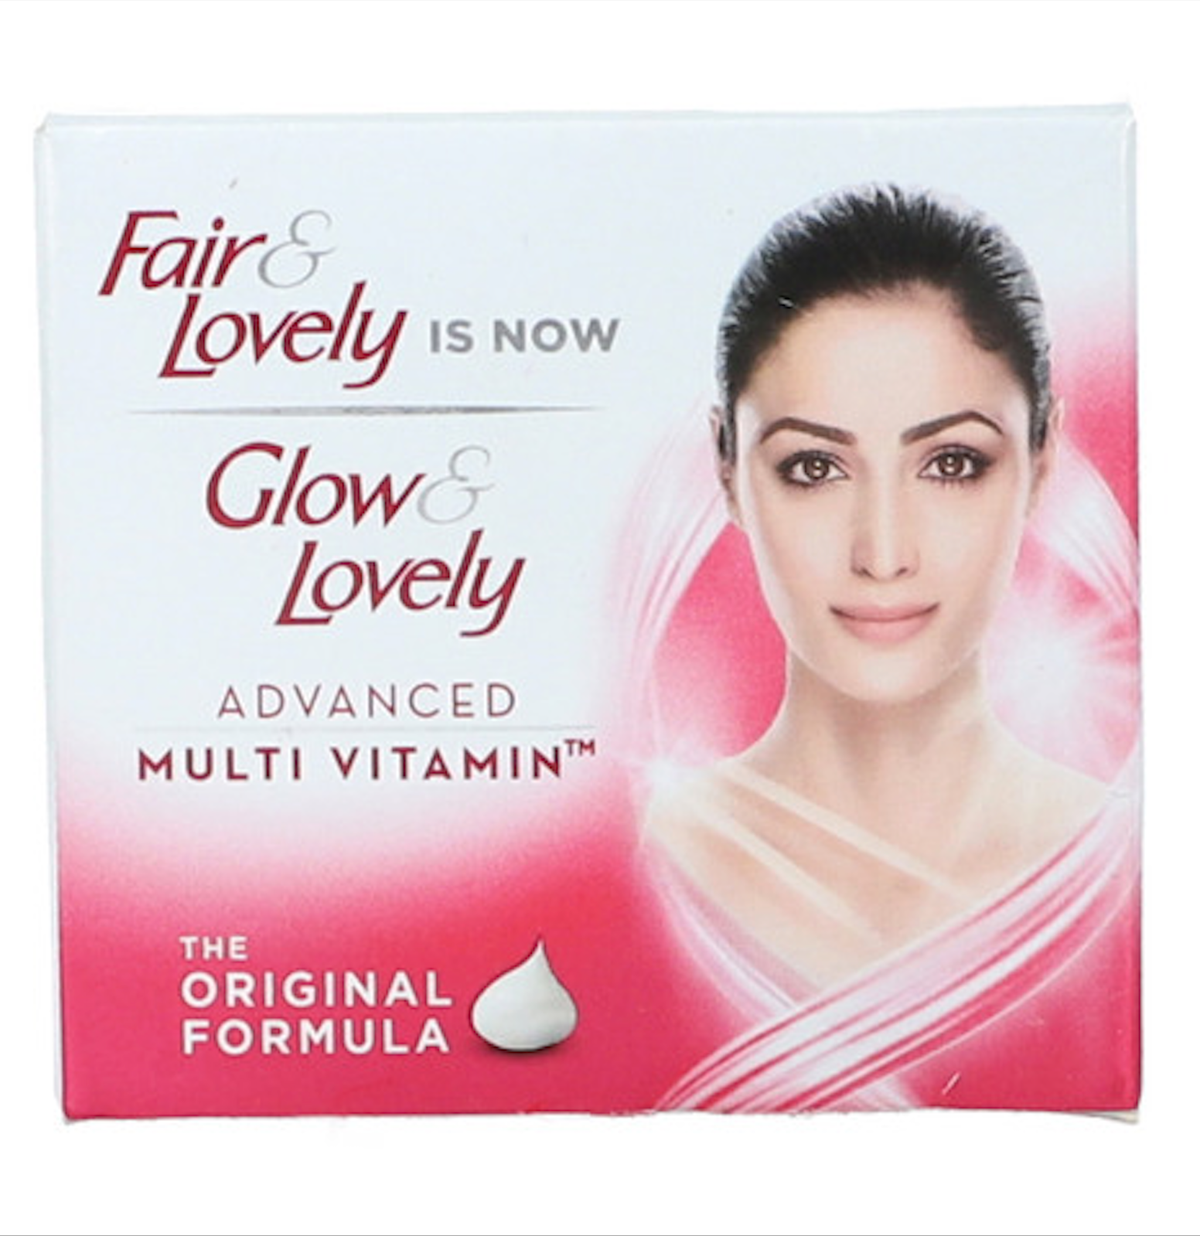 Glow And Lovely Advance Multivitamin Cream Jar - 70ml - Premium Health & Beauty from Glow & Lovely - Just Rs 250.00! Shop now at Cozmetica